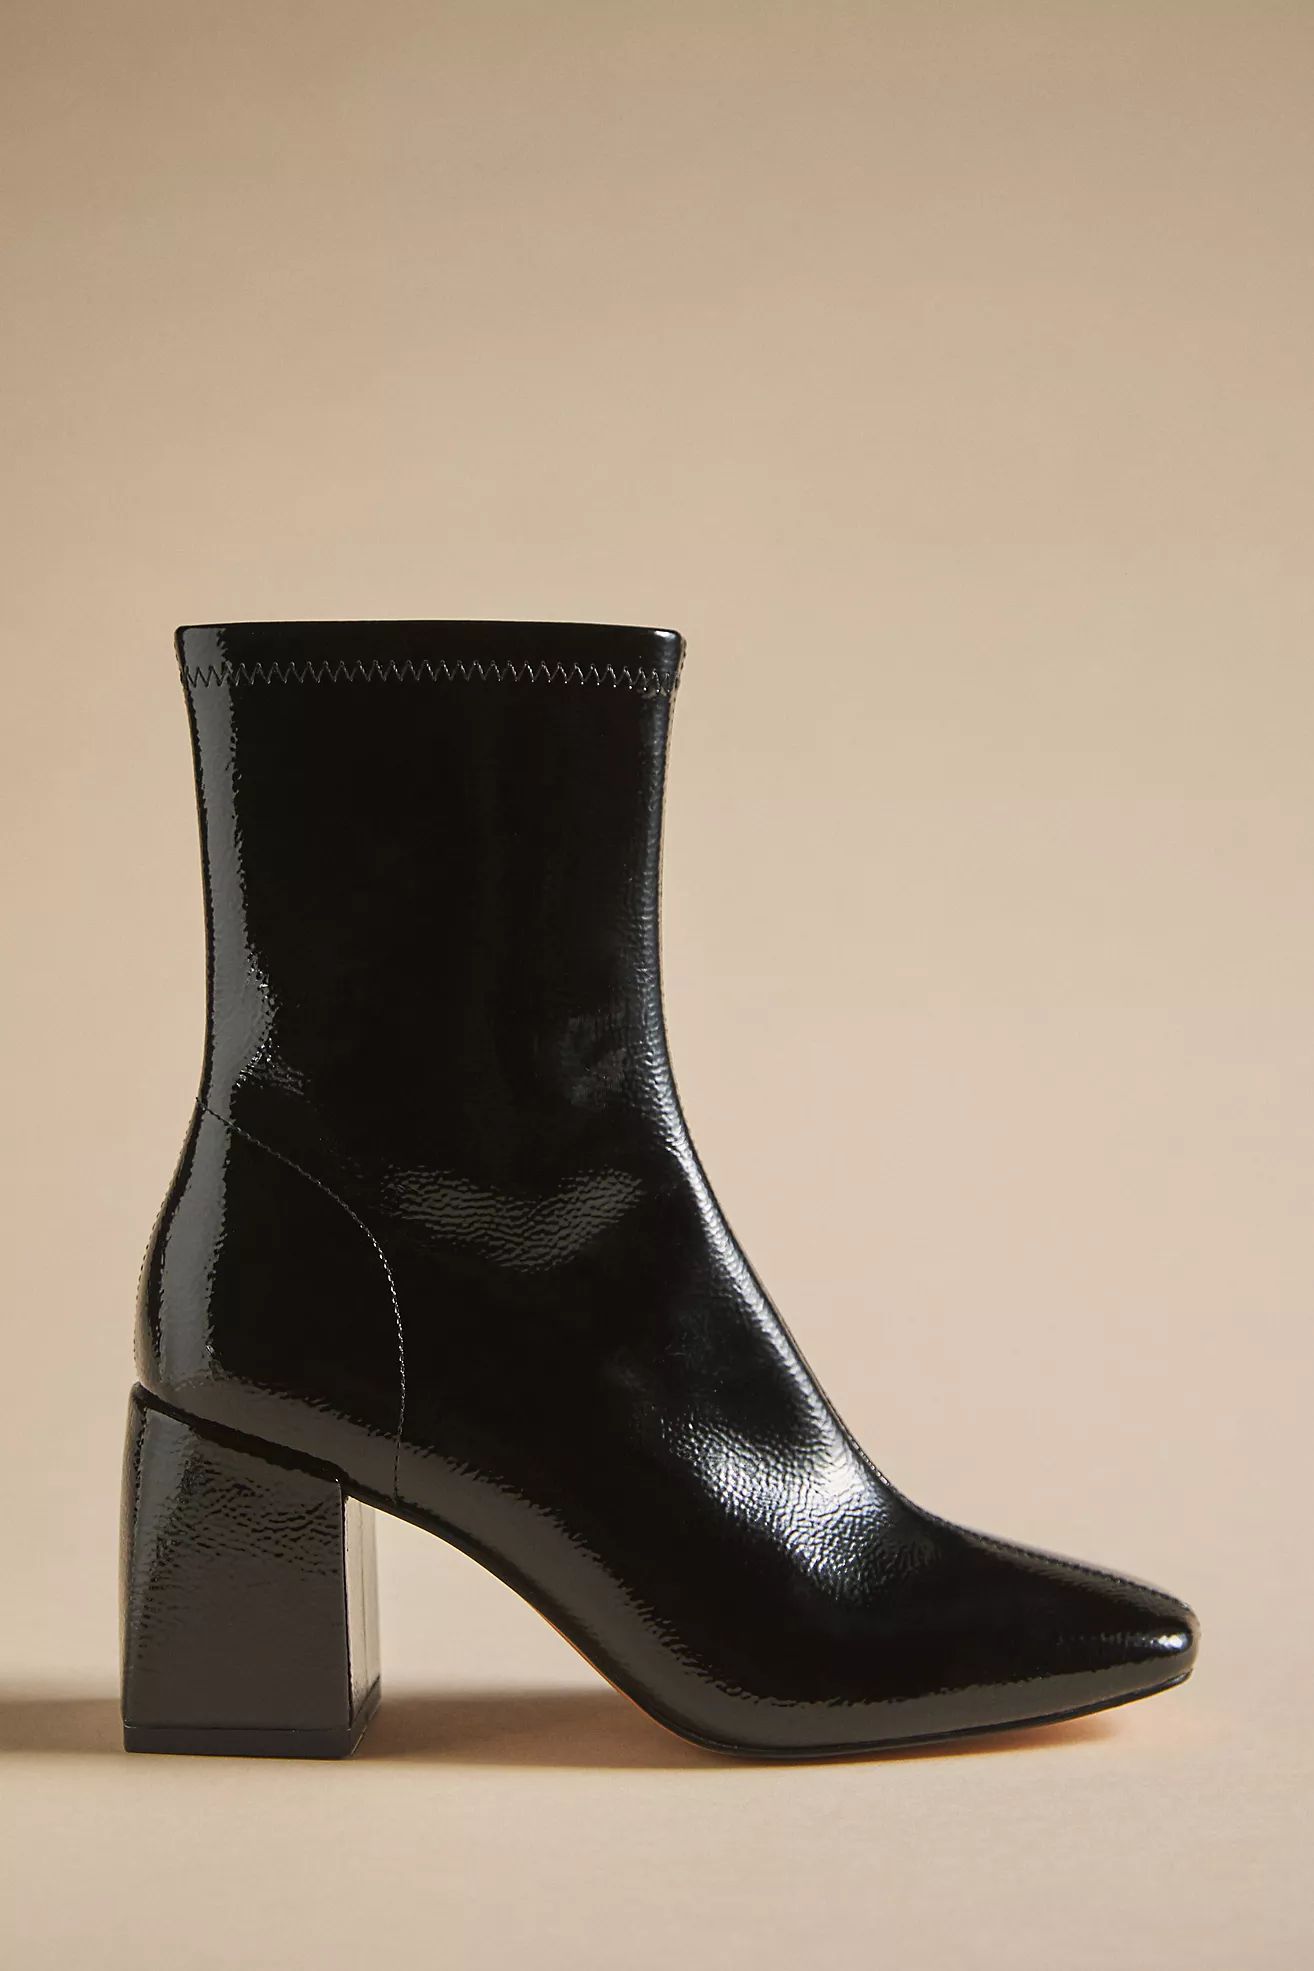 Carina Heeled Ankle Boots | Anthropologie (US)